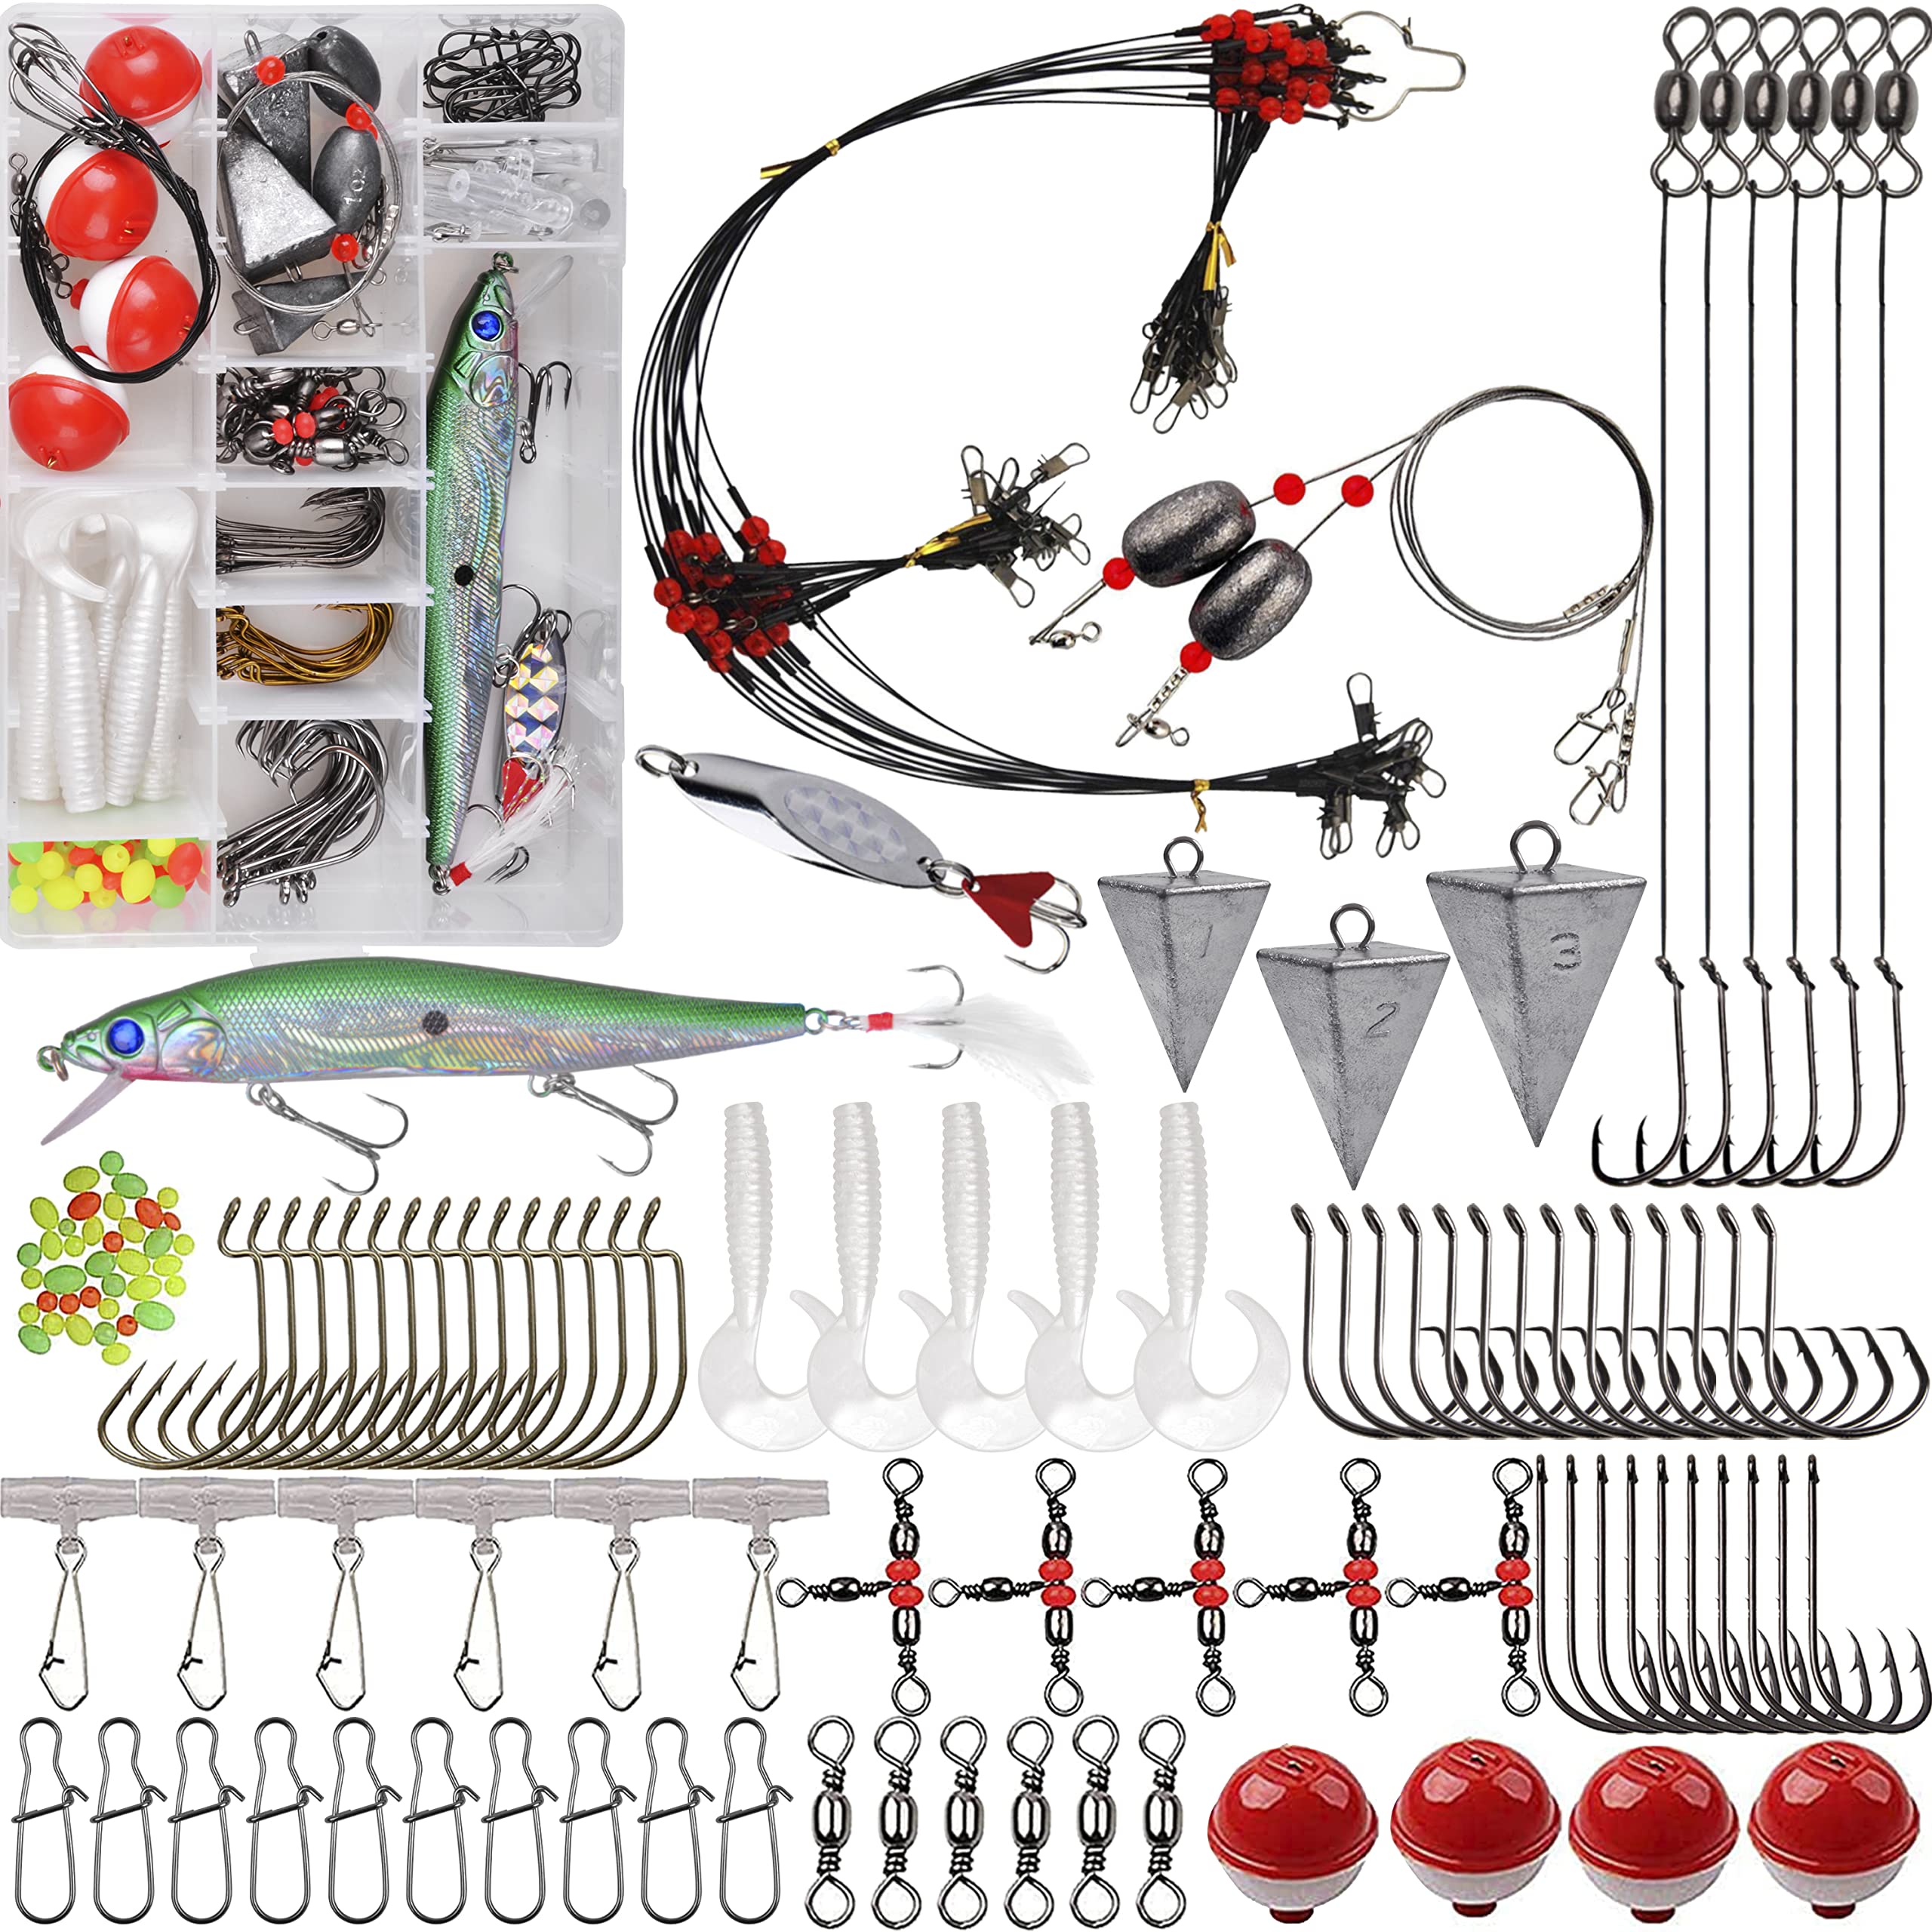 Saltwater Surf Fishing Tackle Kit 136pcs Fish Finder Rigs Bait Rigs Include  Pyramid Sinker Weights Sinker Slider Minnow Spoons Fishing Hooks Swivels  Leaders Beach Ocean Fishing Gear Accessories : Sports & Outdoors 